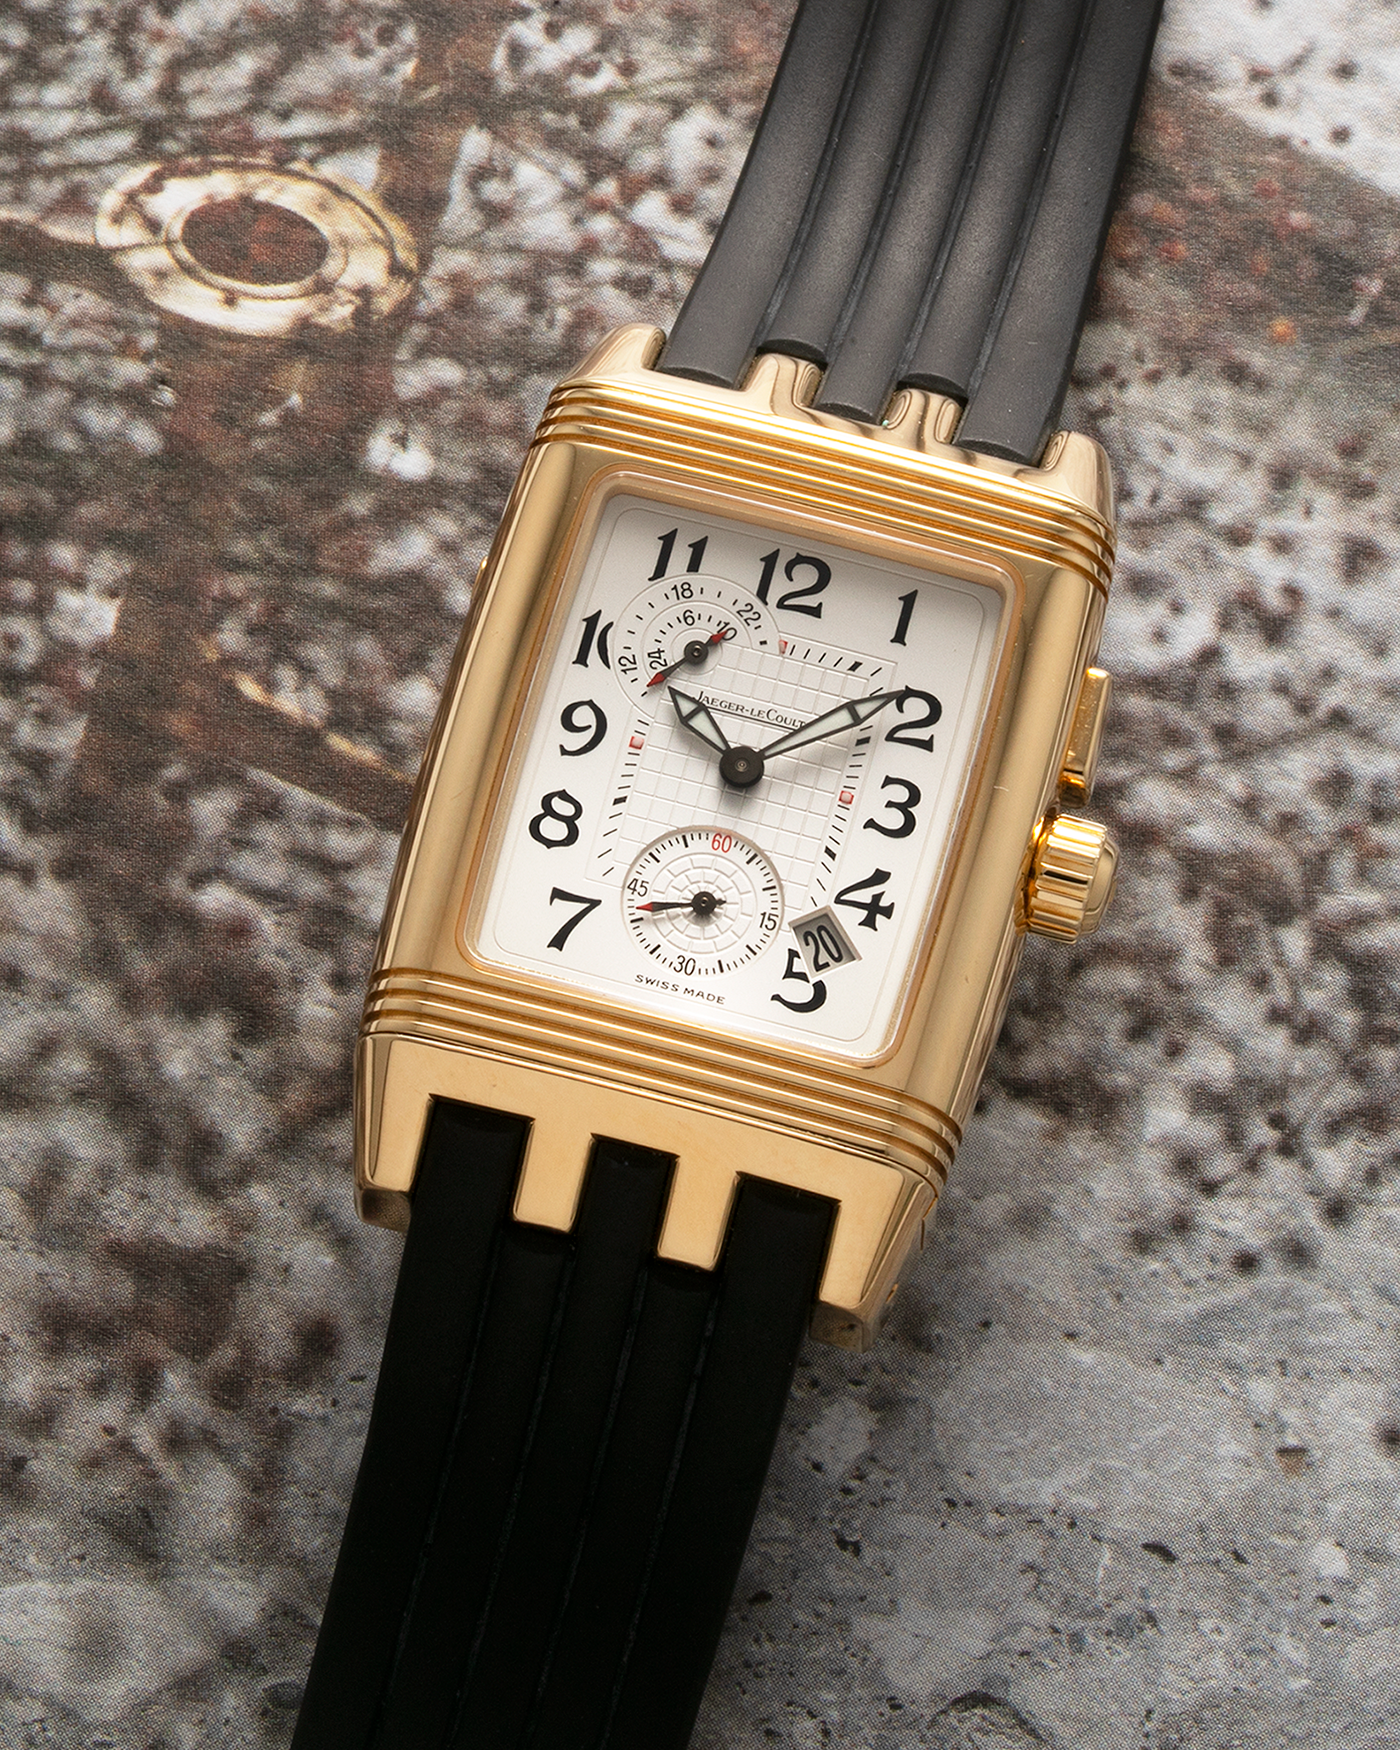 Brand: Jaeger LeCoultre Year: 2000’s Model: Reverso Night and Day Gran’ Sport Duo Model Number: Q2941601 Reference Number: 295.1.51 Material: 18-carat Yellow Gold Movement: JLC Cal. 851, Manual-Wind Case Diameter: 44mm x 38mm Strap: Jaeger LeCoultre Gran’ Sport Rubber Strap with Signed 18-carat Yellow Gold Deployant Clasp